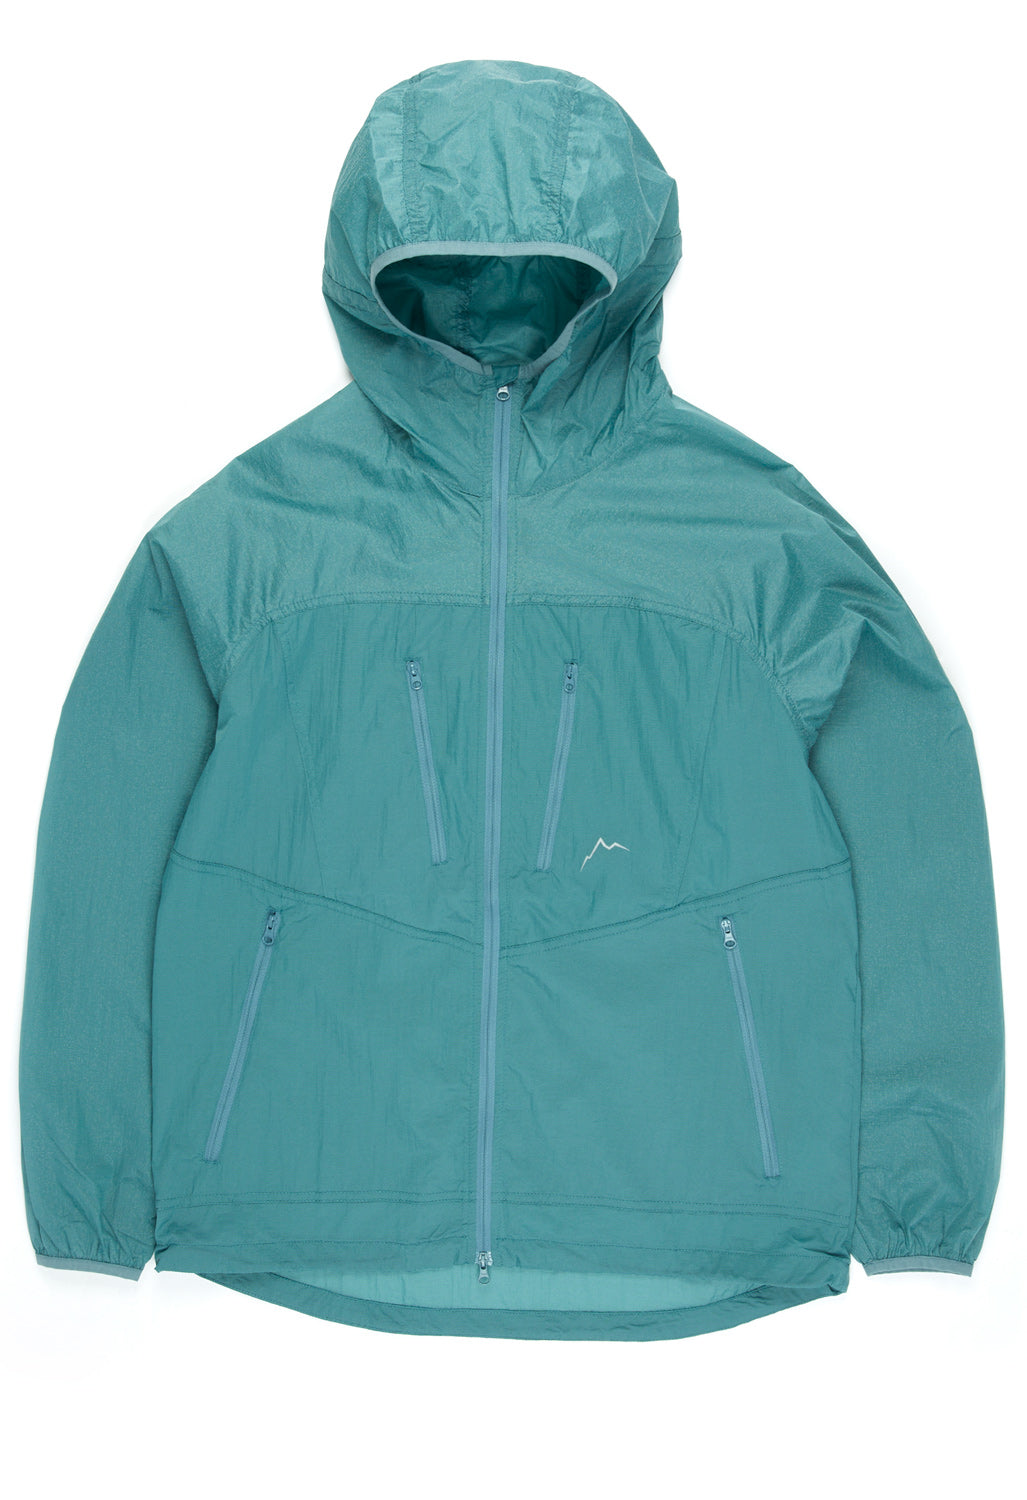 CAYL Reflect Wind Jacket - Teal – Outsiders Store UK